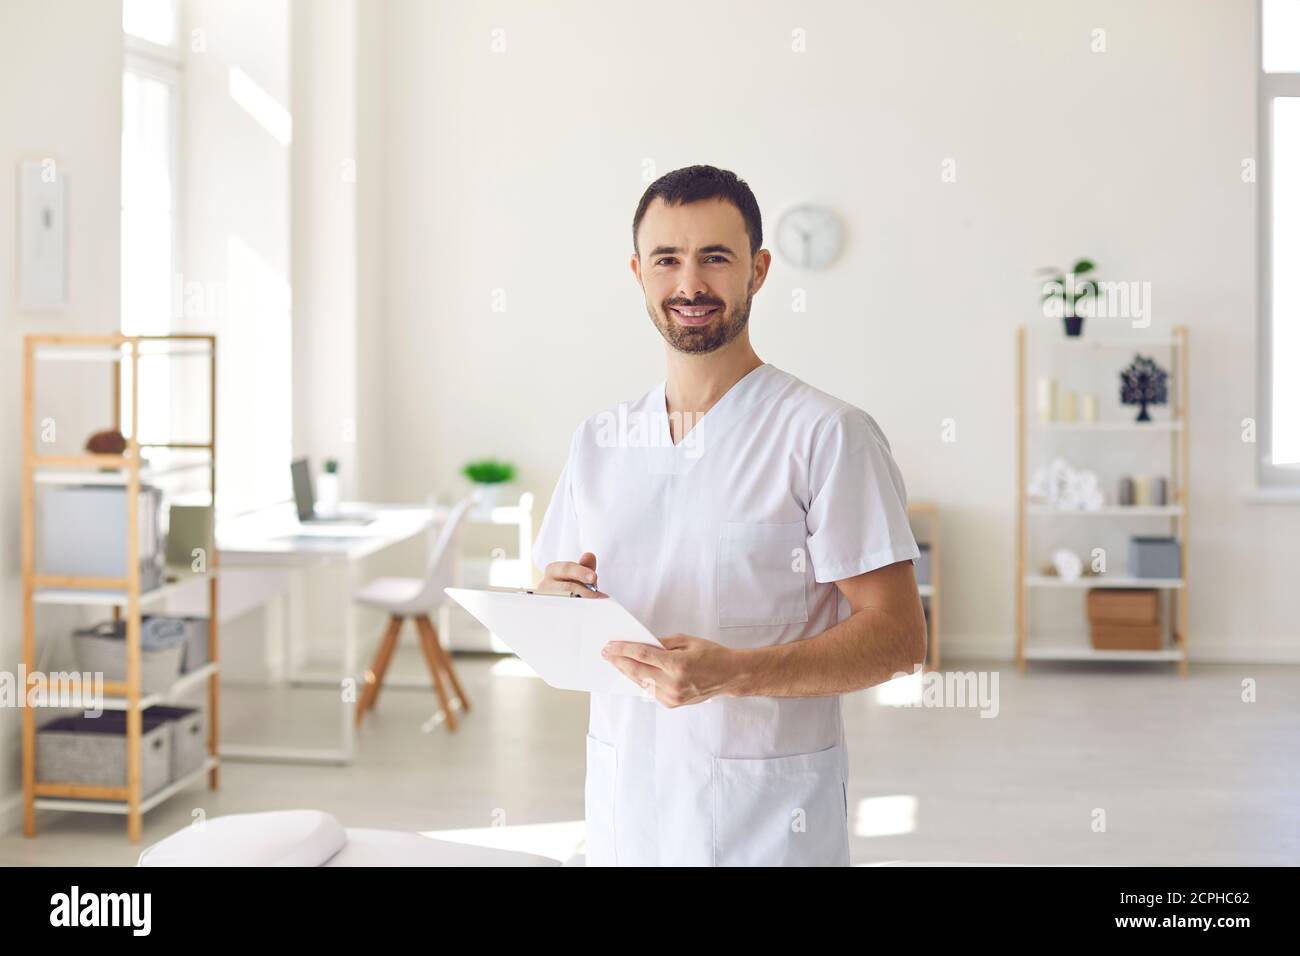 Smiling man doctor chiropractor or osteopath standing with notes and looking at camera Stock Photo